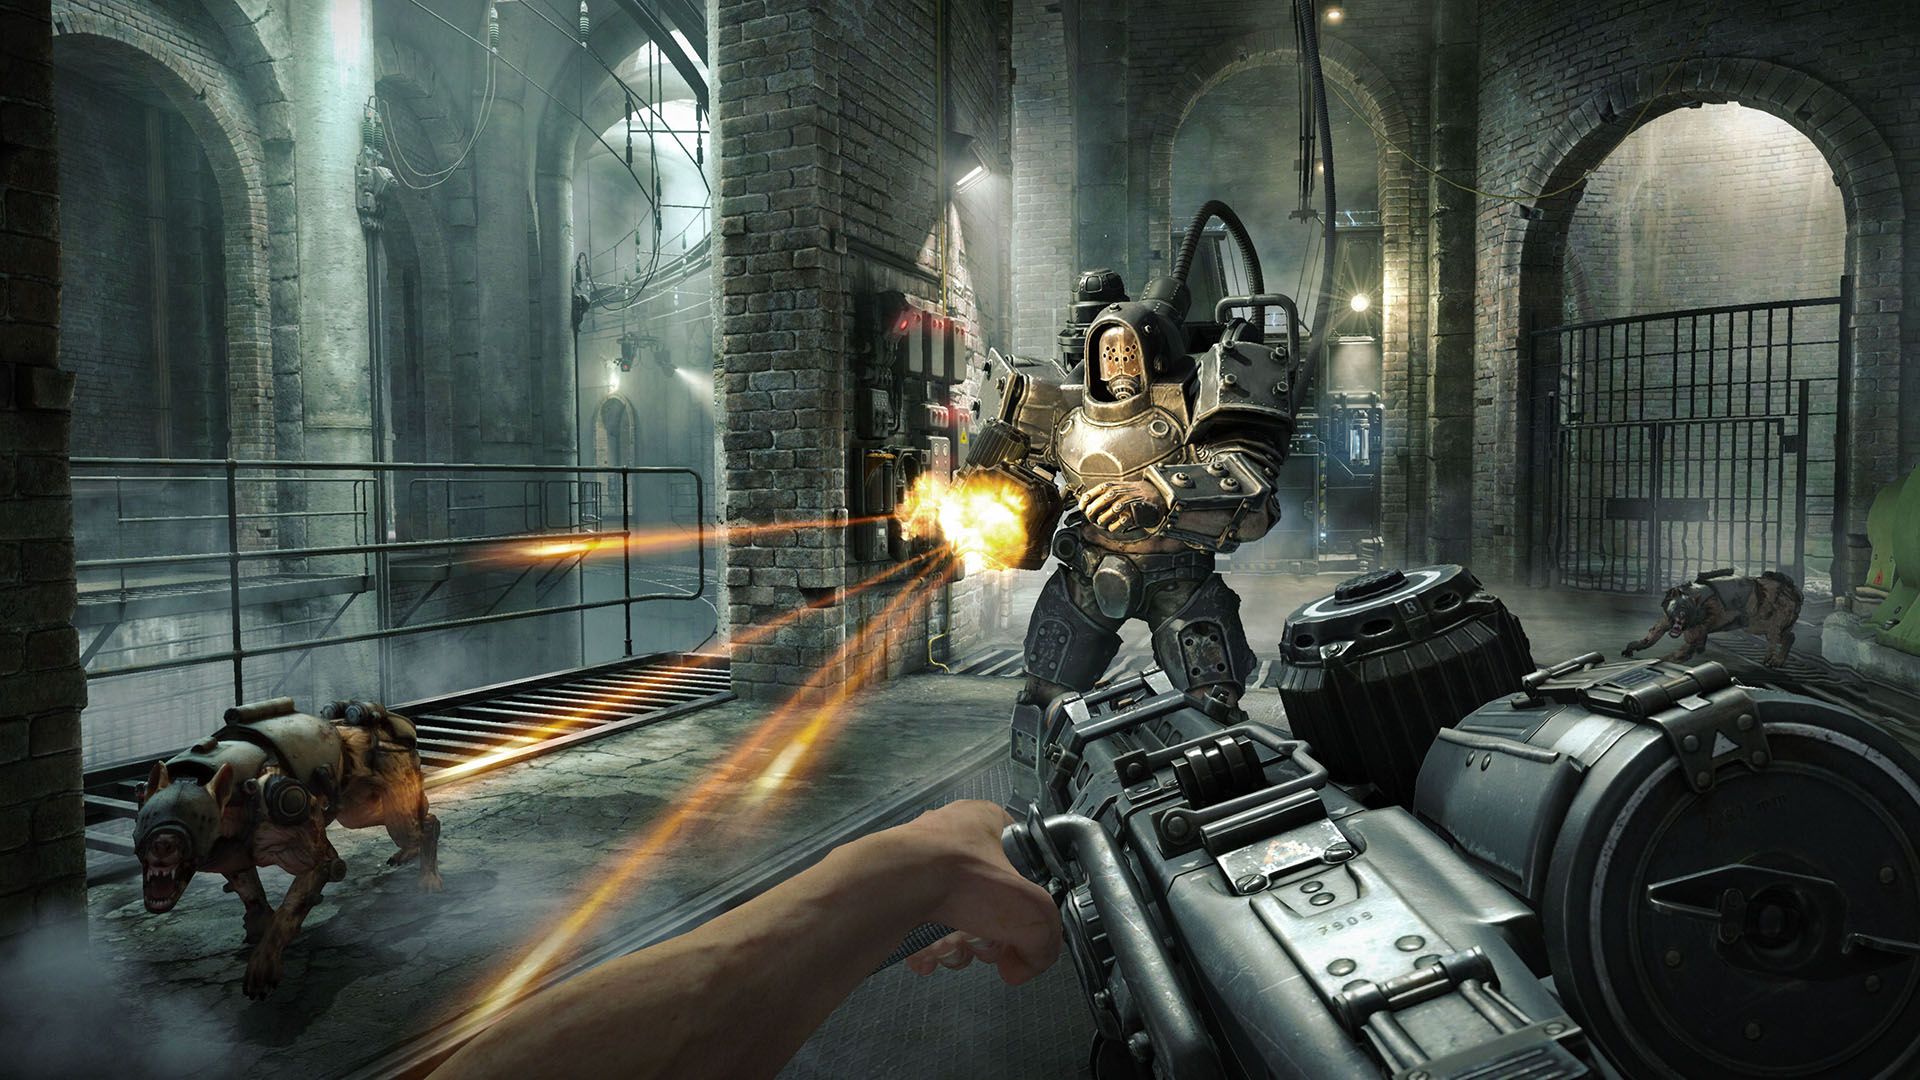 Buy Wolfenstein: The New Order Uncut PC Game